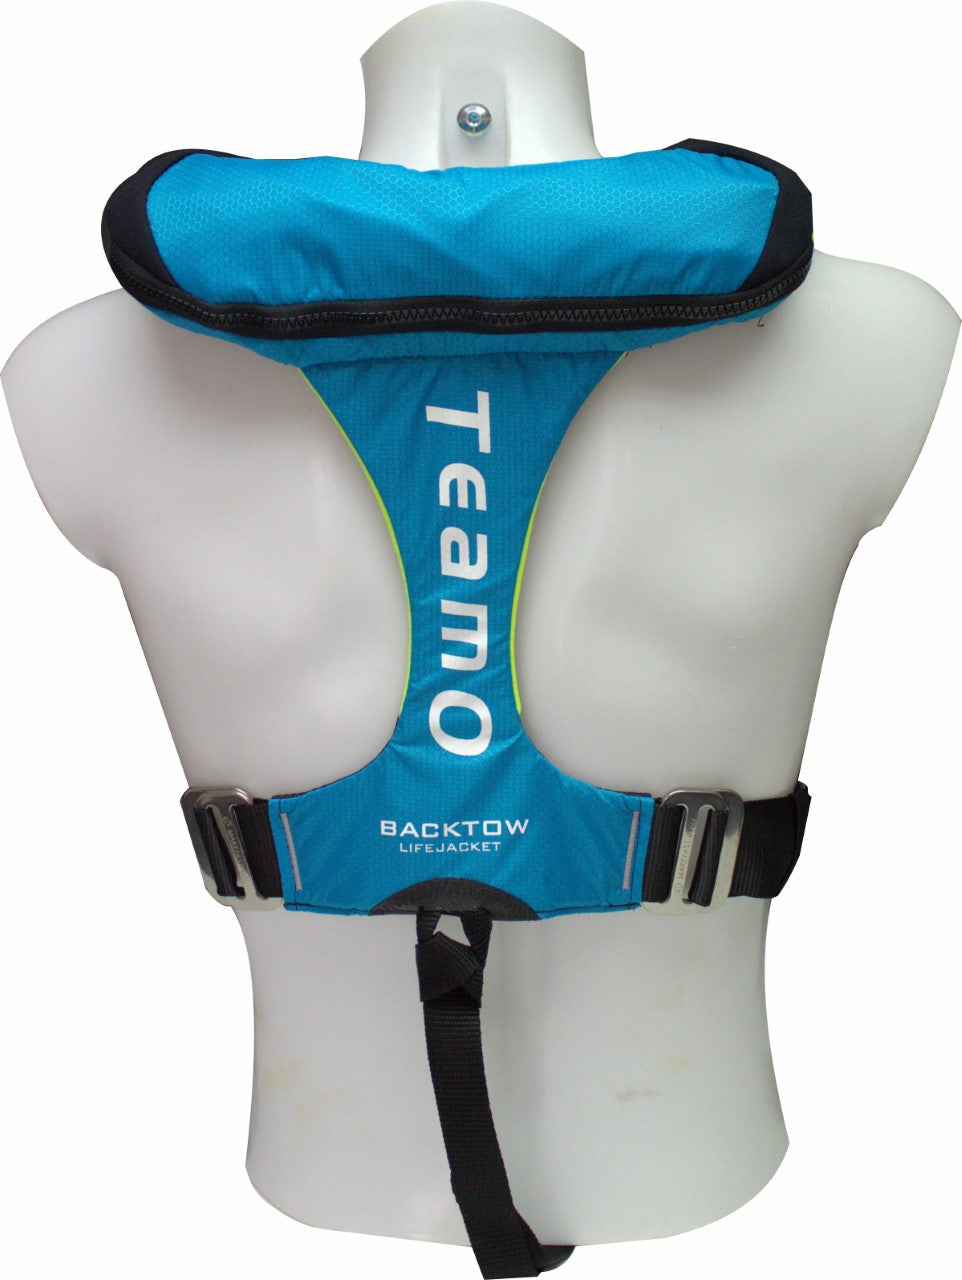 170N BackTow inflatable PFD in blue from back